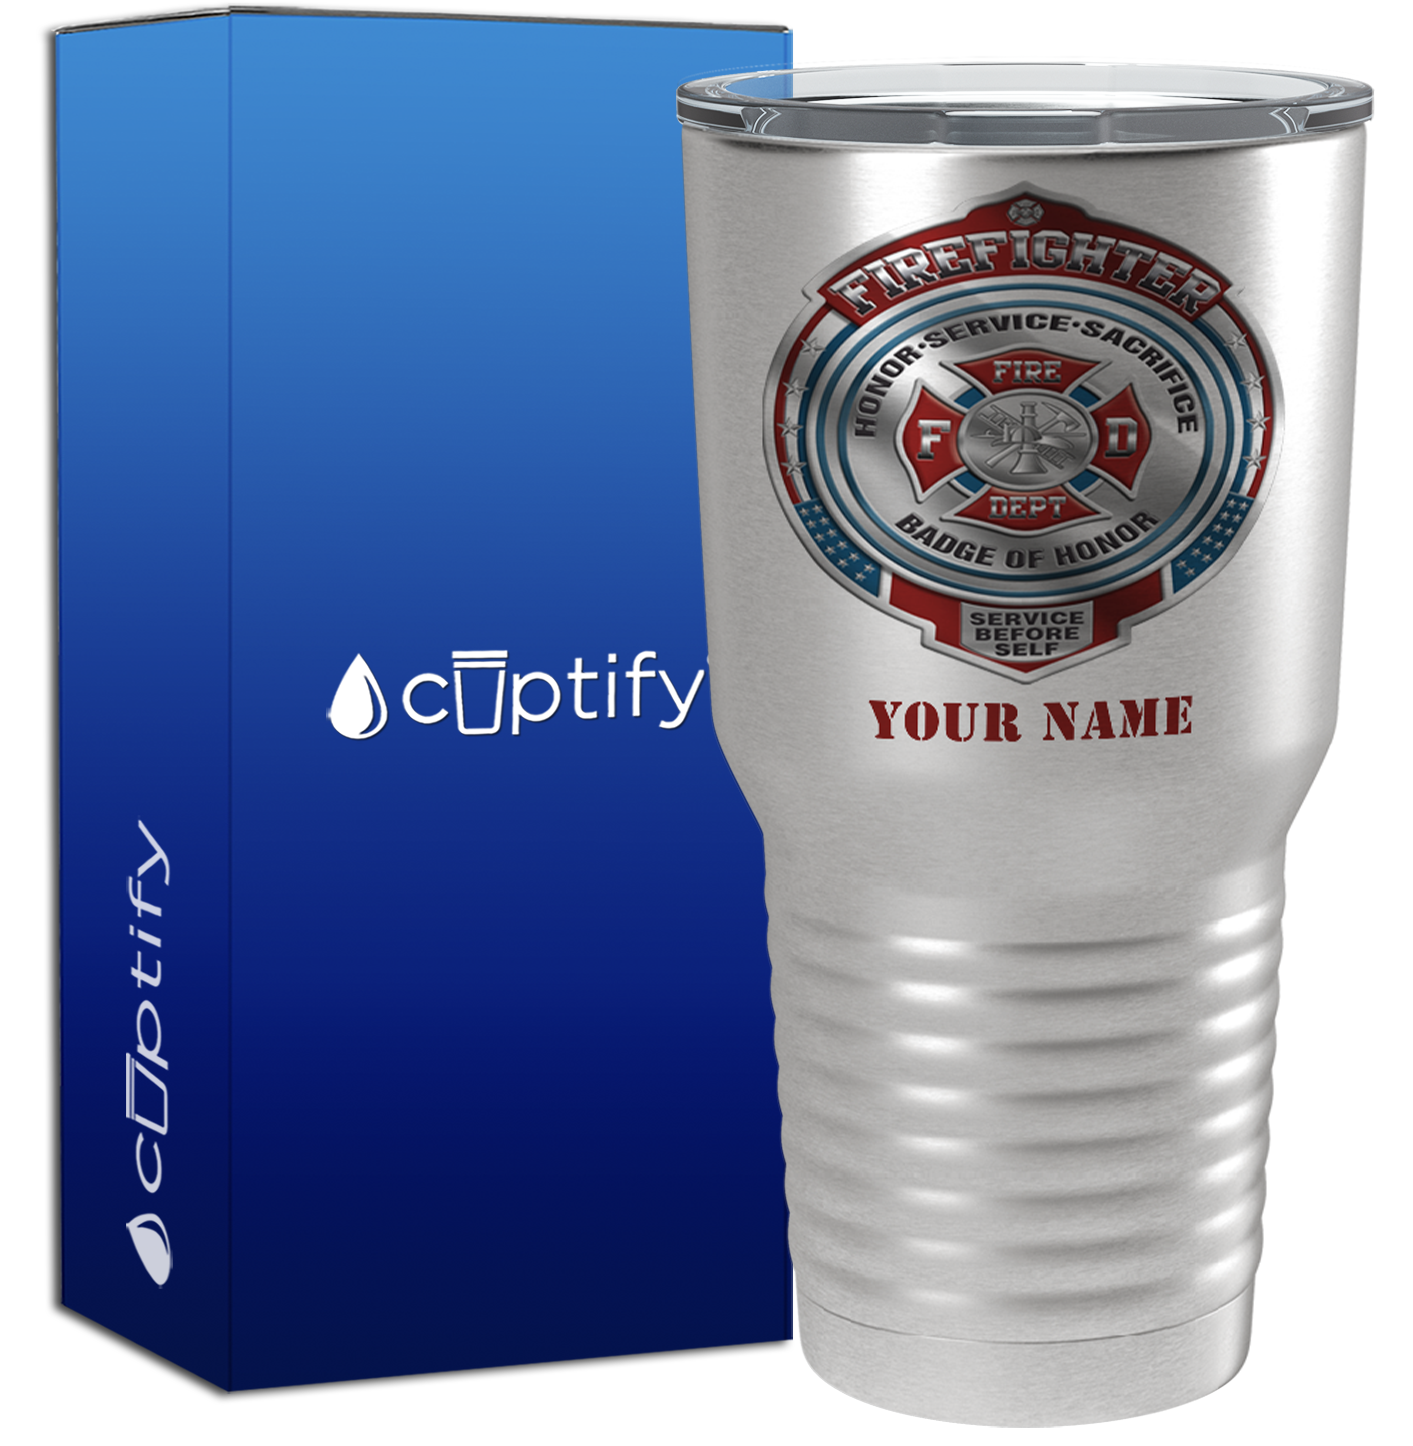 Firefighter Tumblers - Cuptify